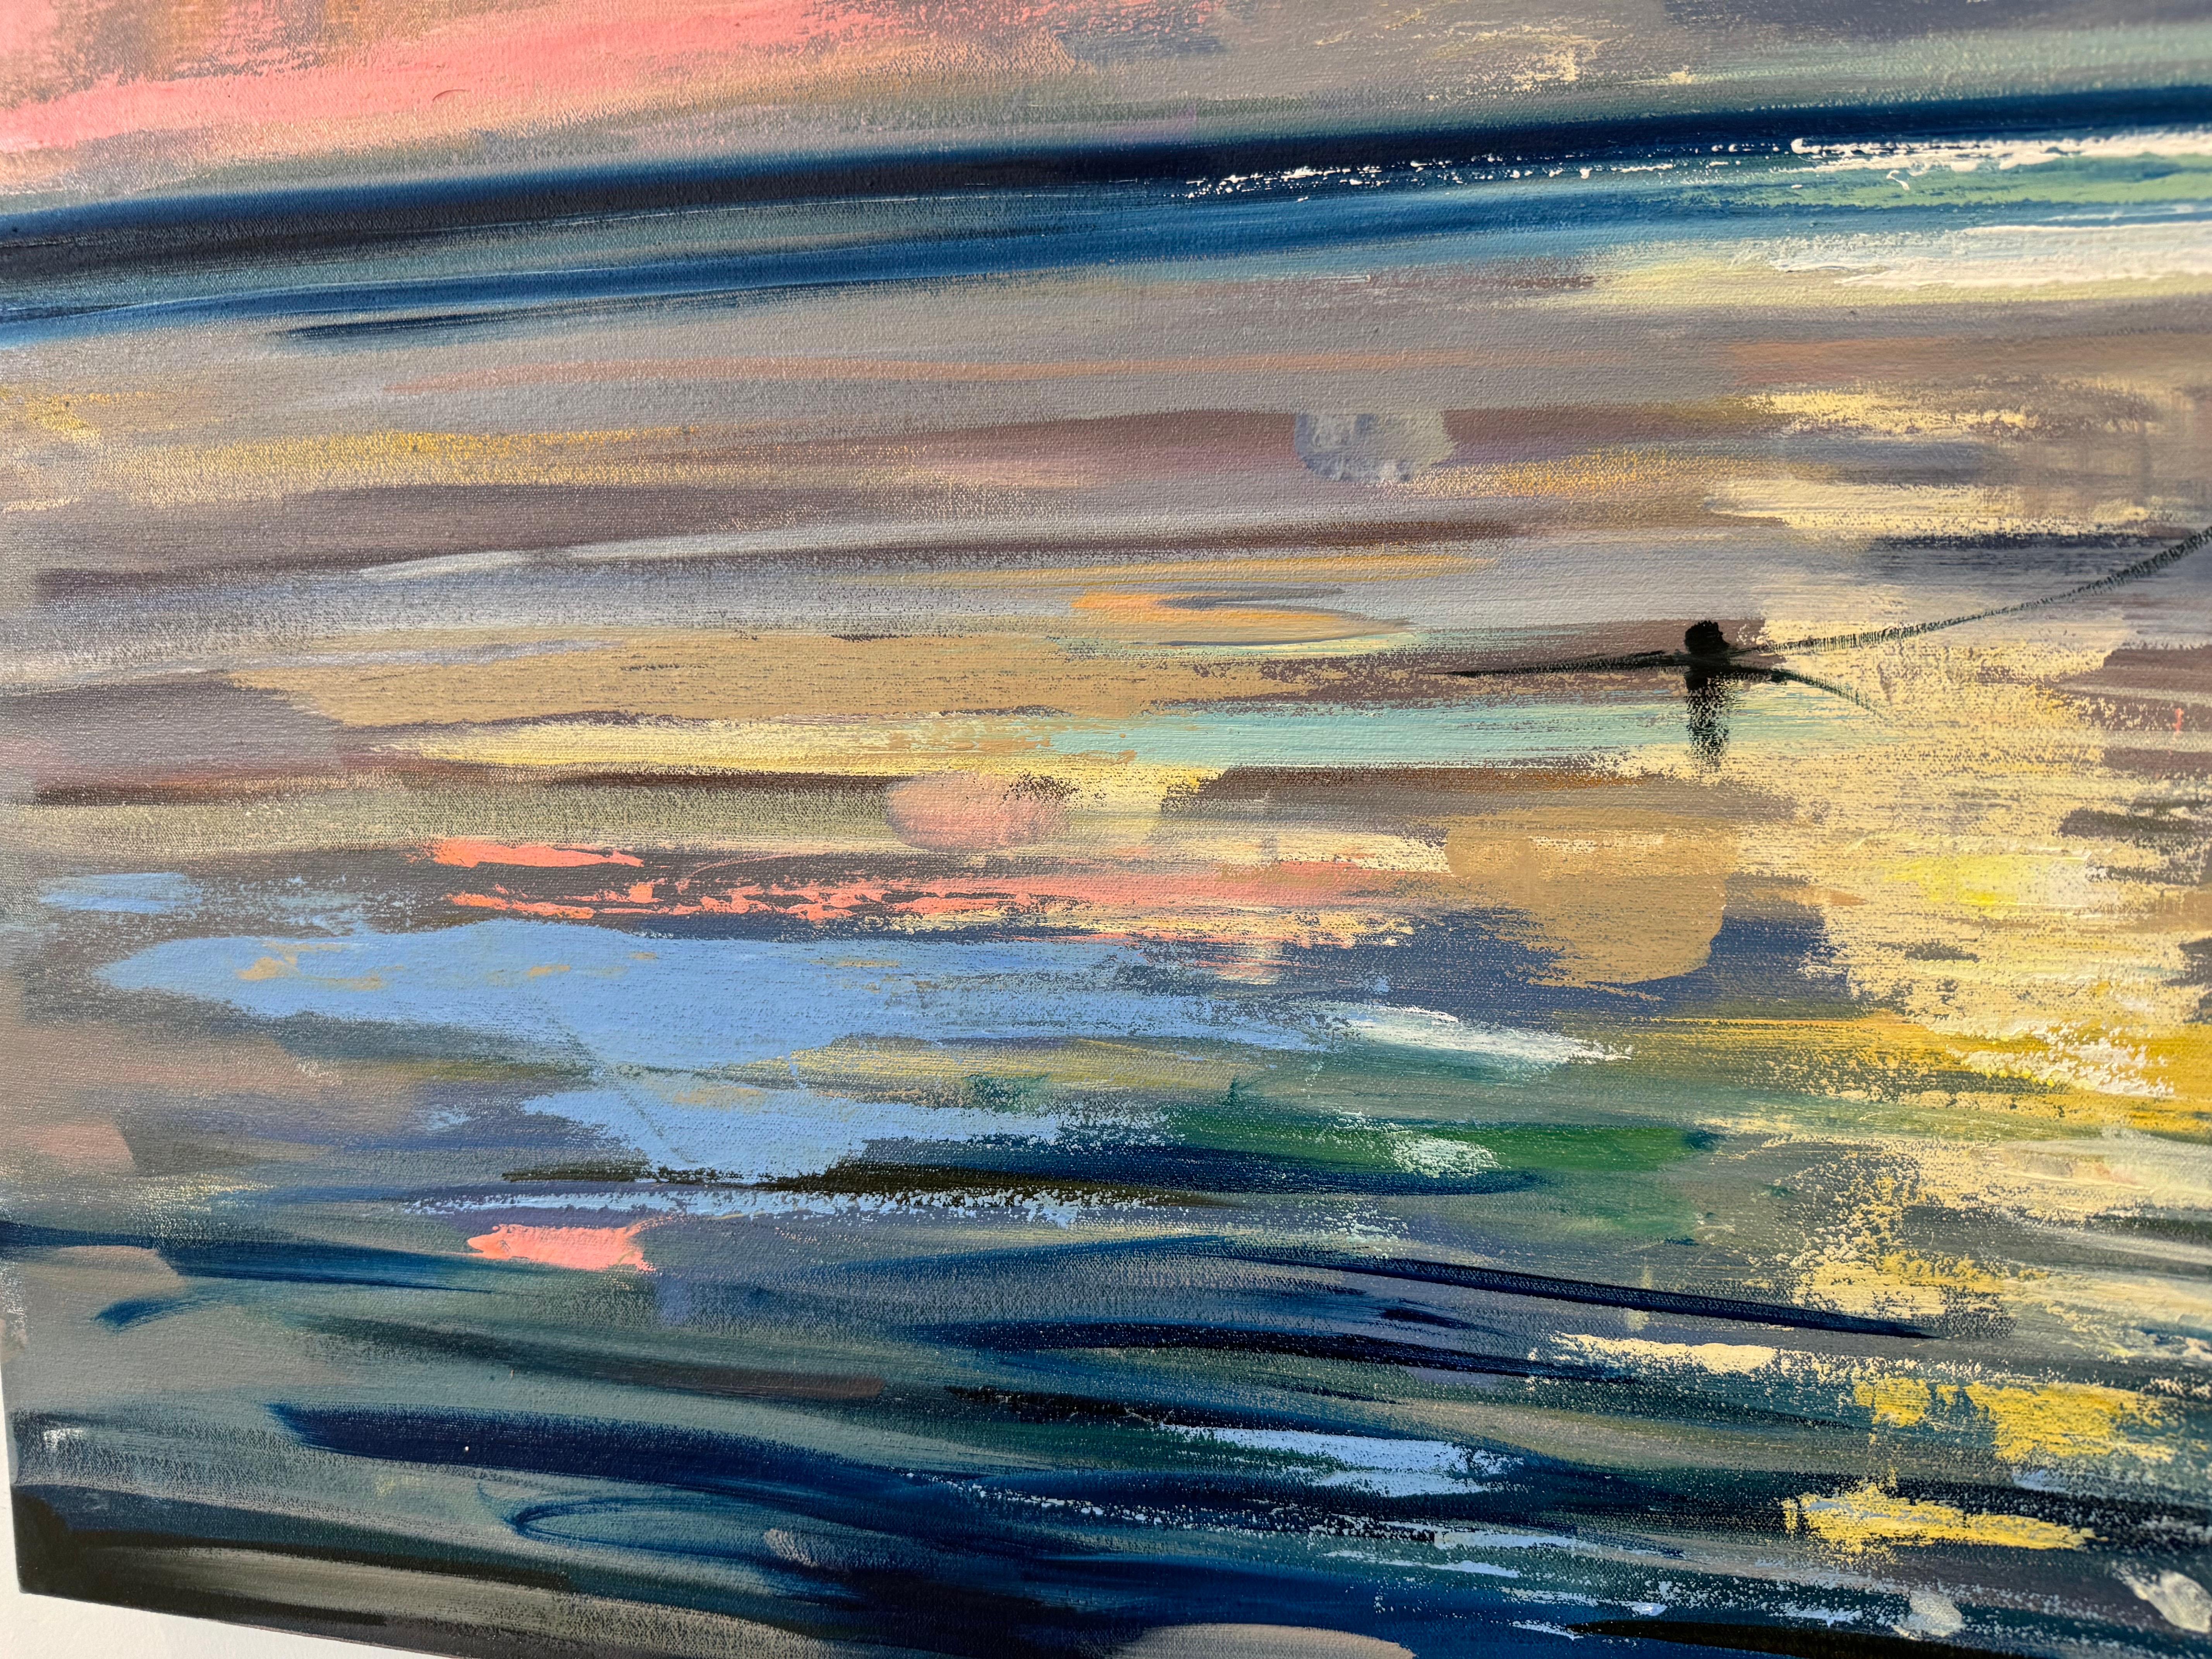 Sky Reflection by Craig Mooney, Large Contemporary Landscape with Boat and Ocean For Sale 2